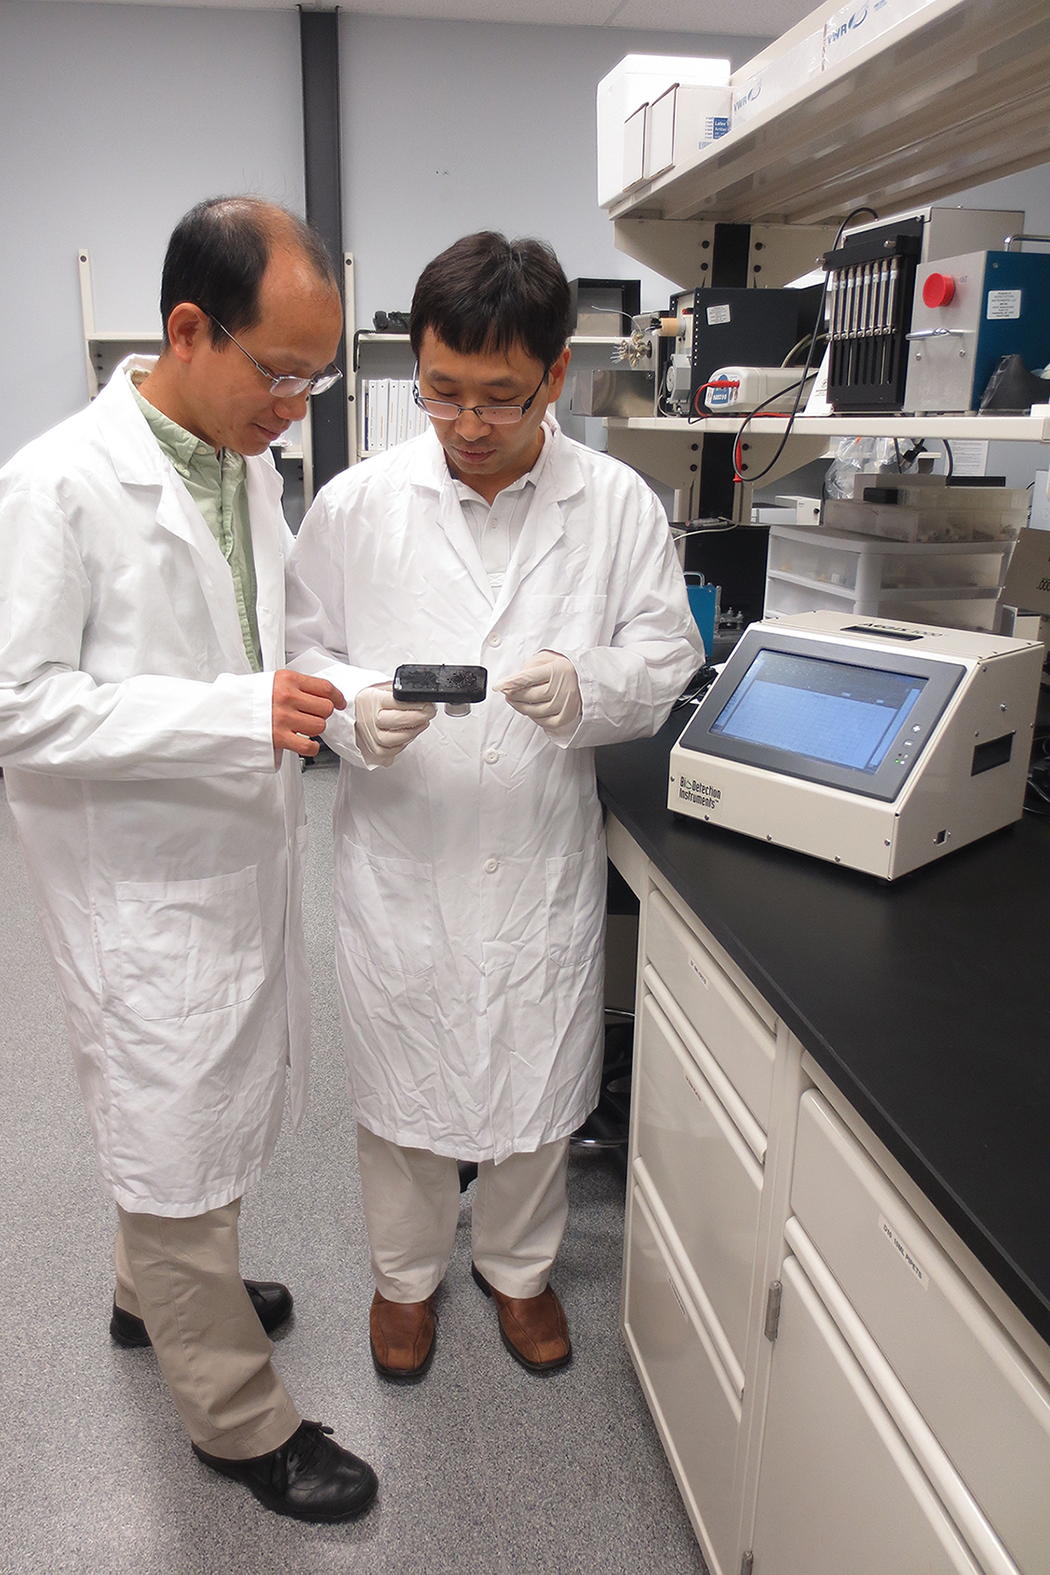 Dr. Chien Nguyen, Senior Electrical Engineer (left), and Dr. Xaioli Su, Director of Research & Development of Biodetection Instruments™, discuss the cartridge developed to detect pathogens.